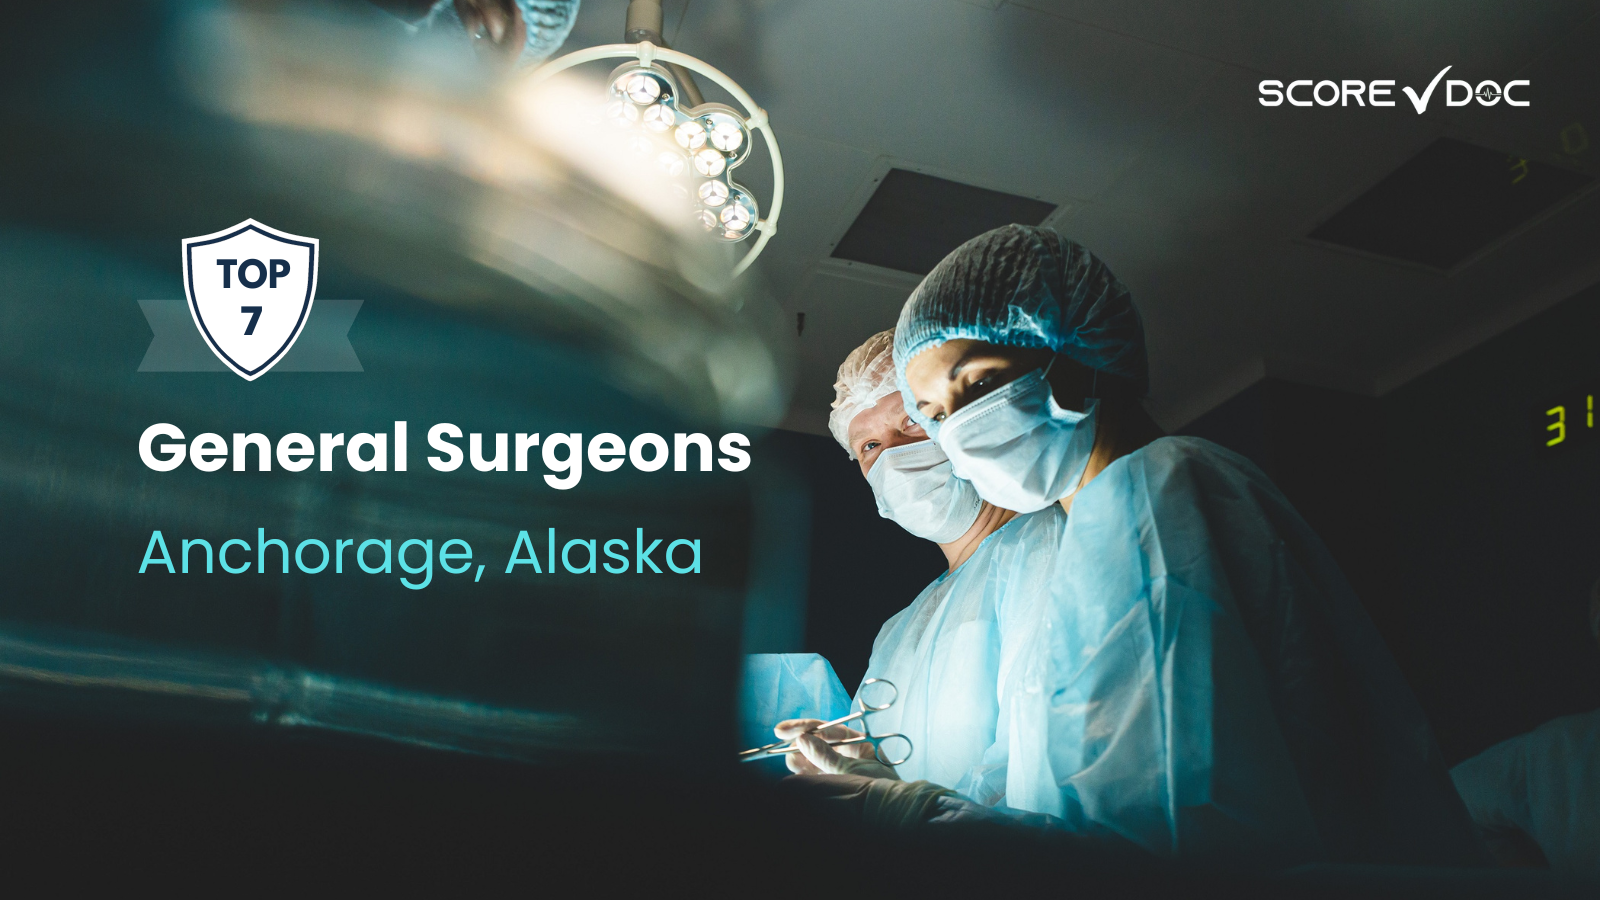 Top-Rated General Surgeons in Anchorage, Alaska